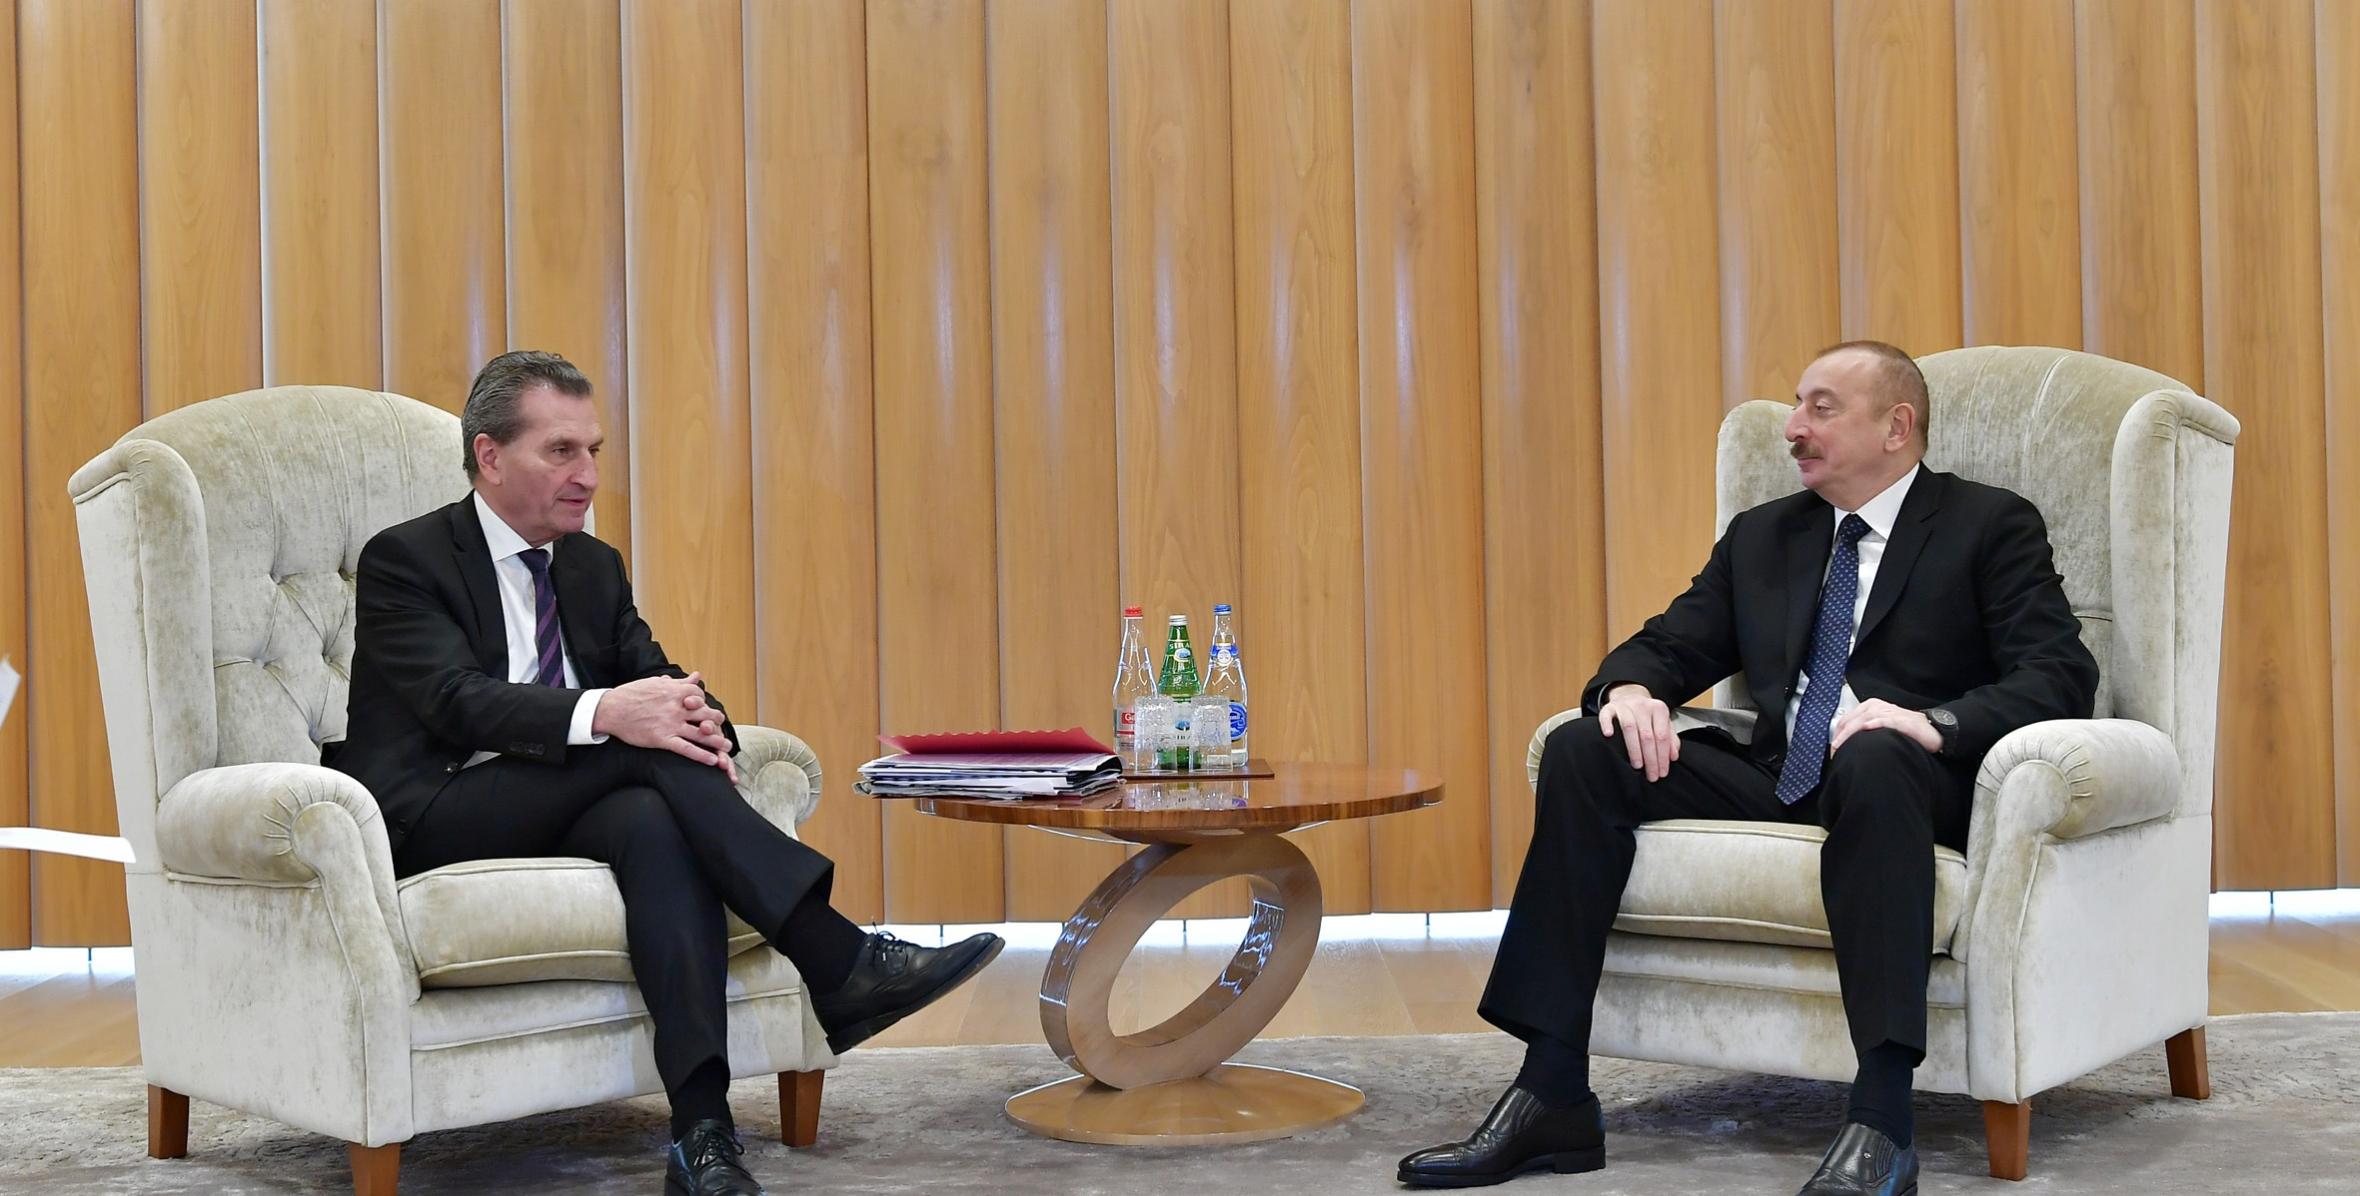 Ilham Aliyev met with European Commissioner for Budget and Human Resources